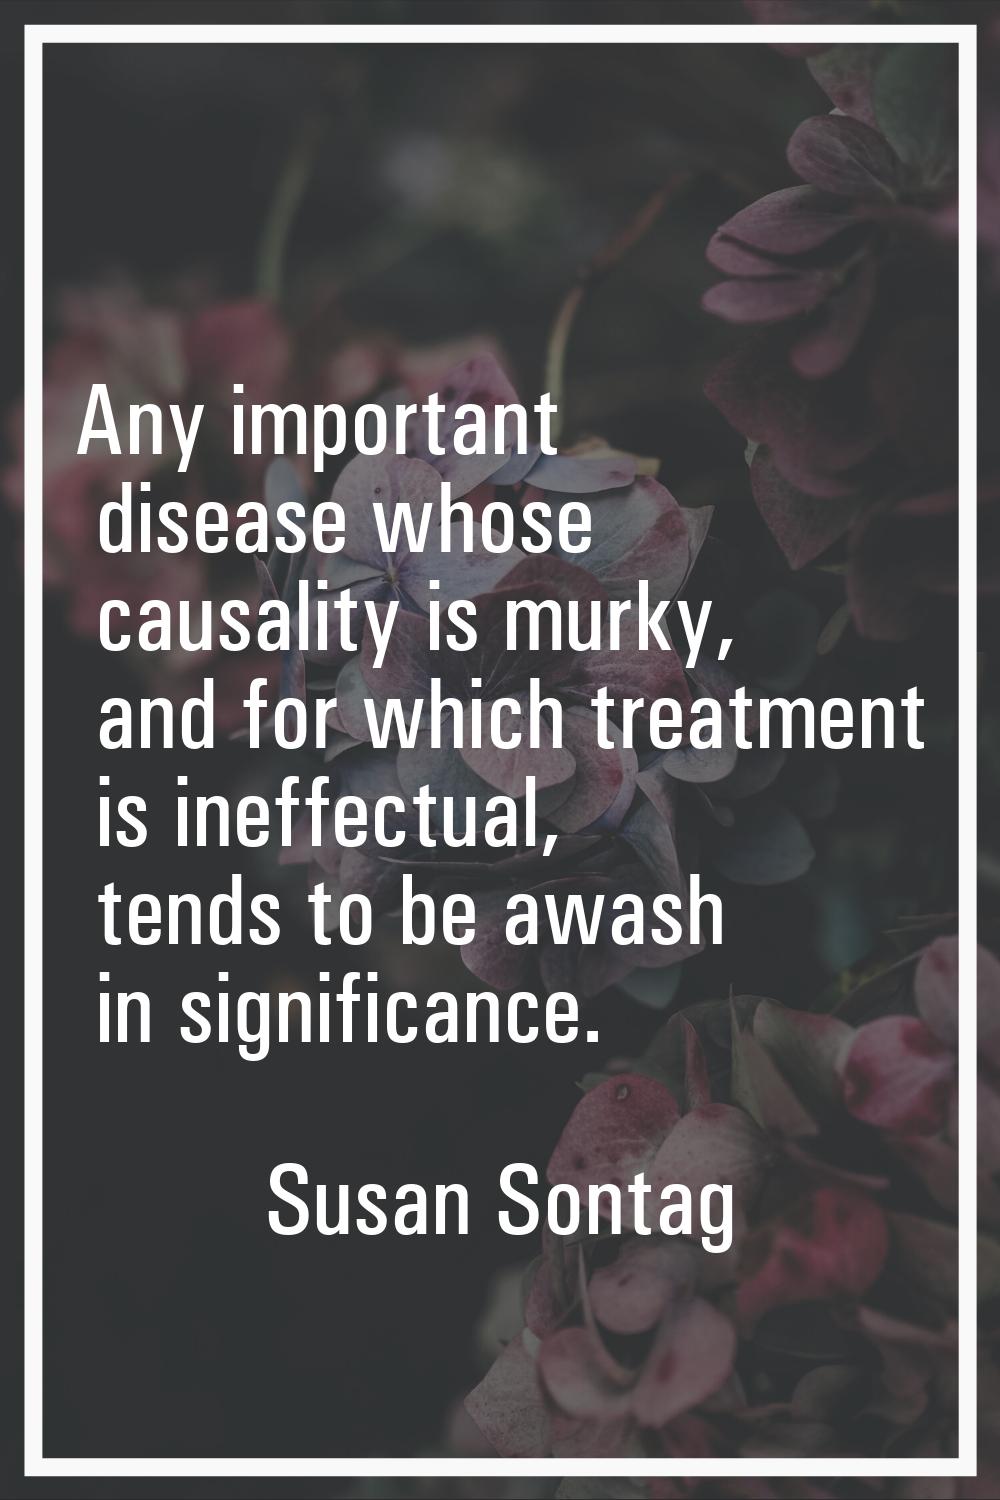 Any important disease whose causality is murky, and for which treatment is ineffectual, tends to be